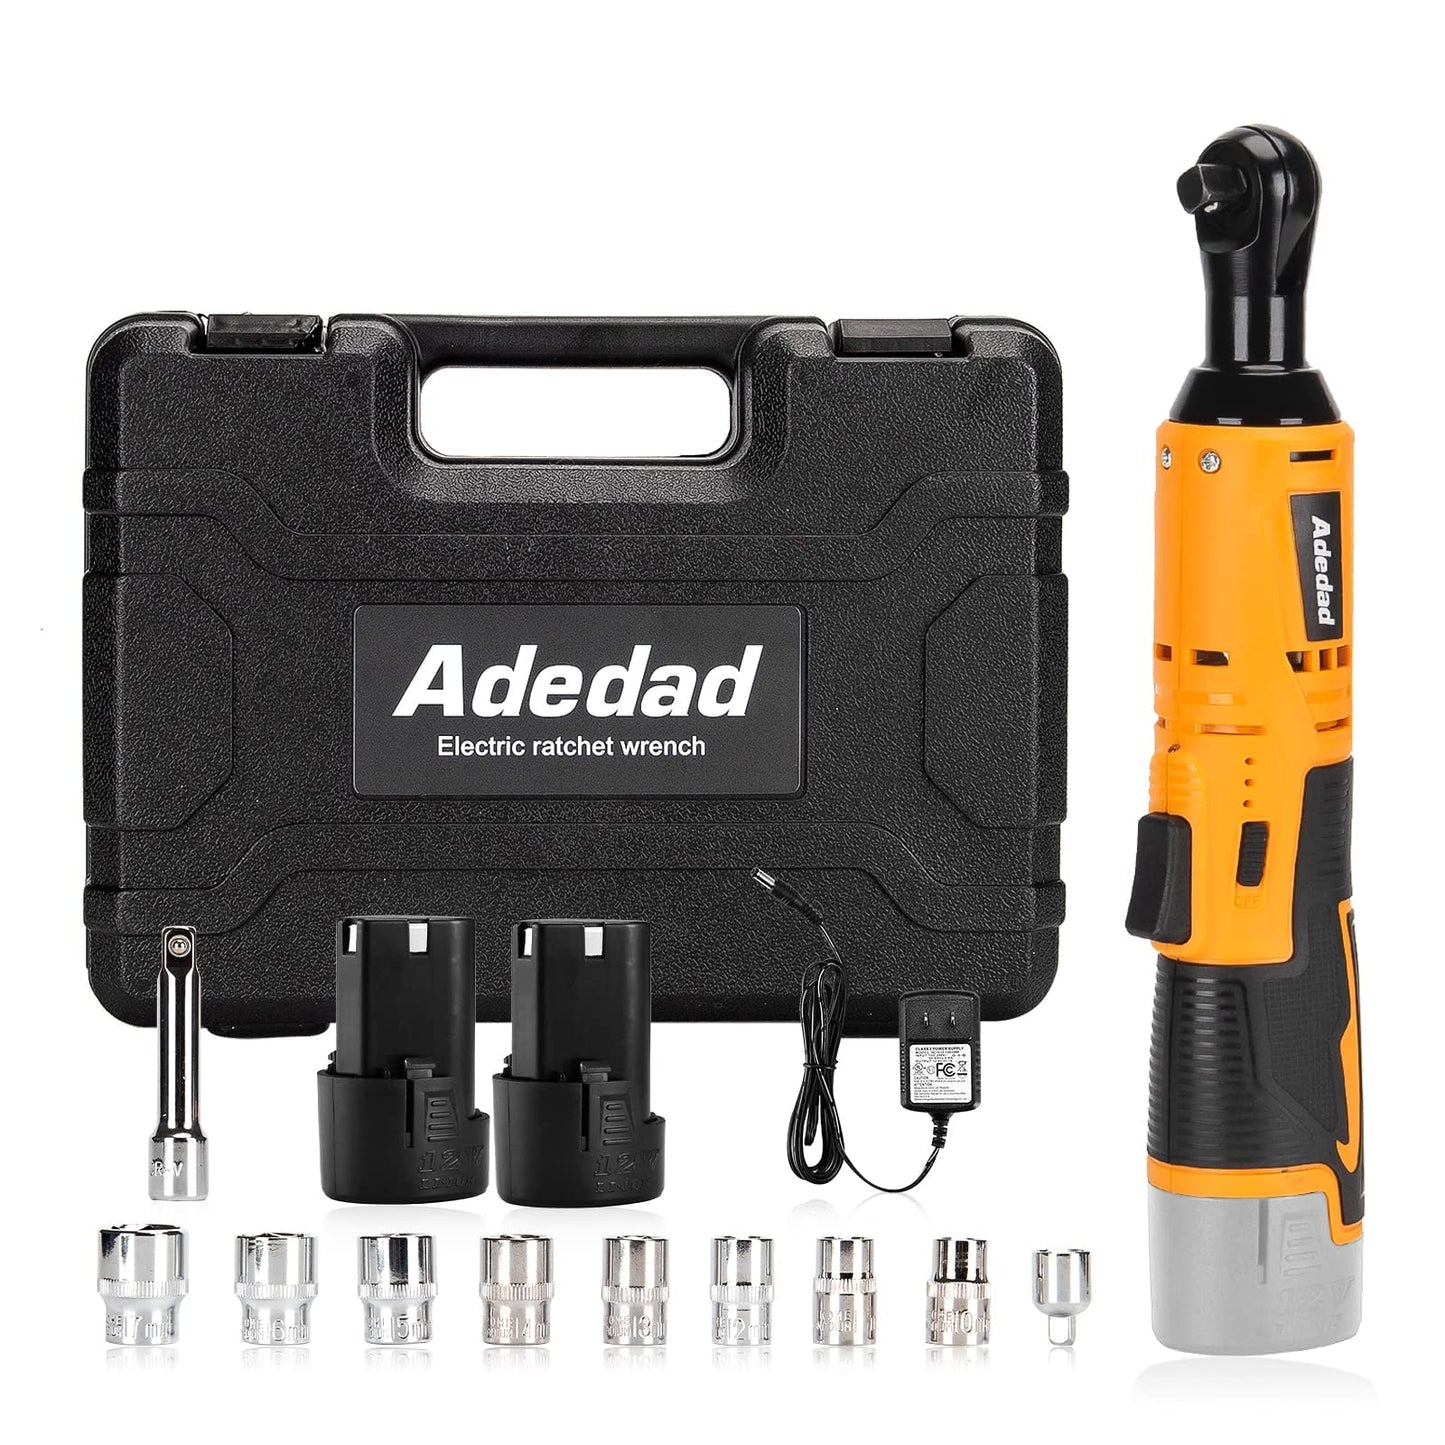 Adedad Cordless Ratchet Wrench Set w/ 2 Batteries, 3/8” 40Ft-lbs 400 RPM 12V Battery Powered Ratcheting Wrench Tool Kit, Variable Speed Trigger, 10